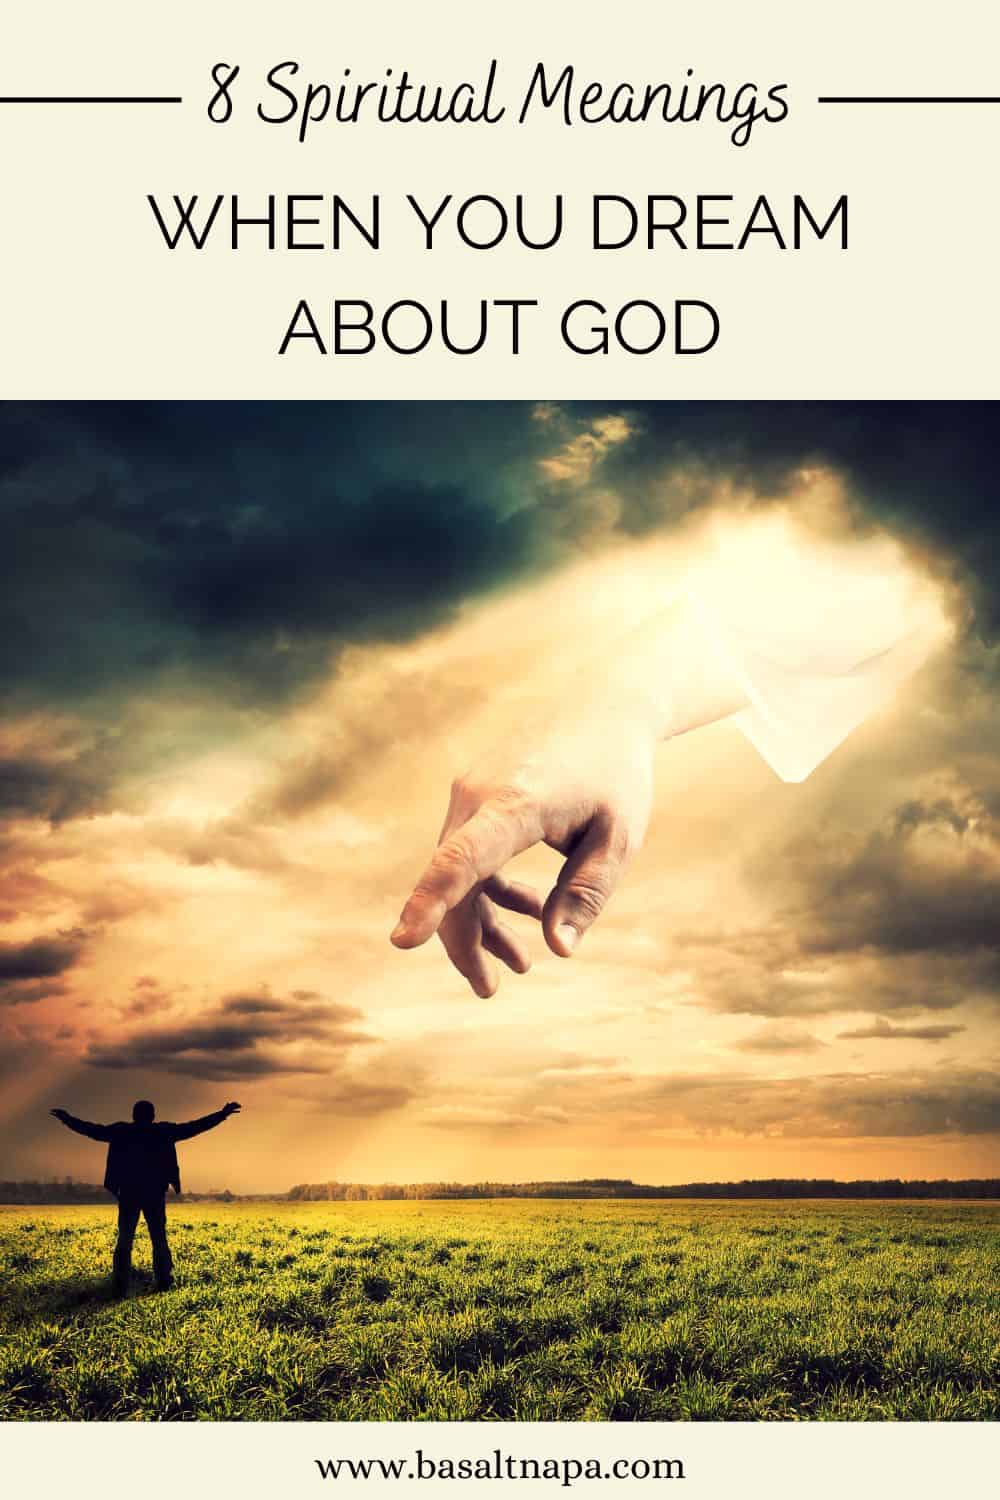 What does it mean when you dream about God